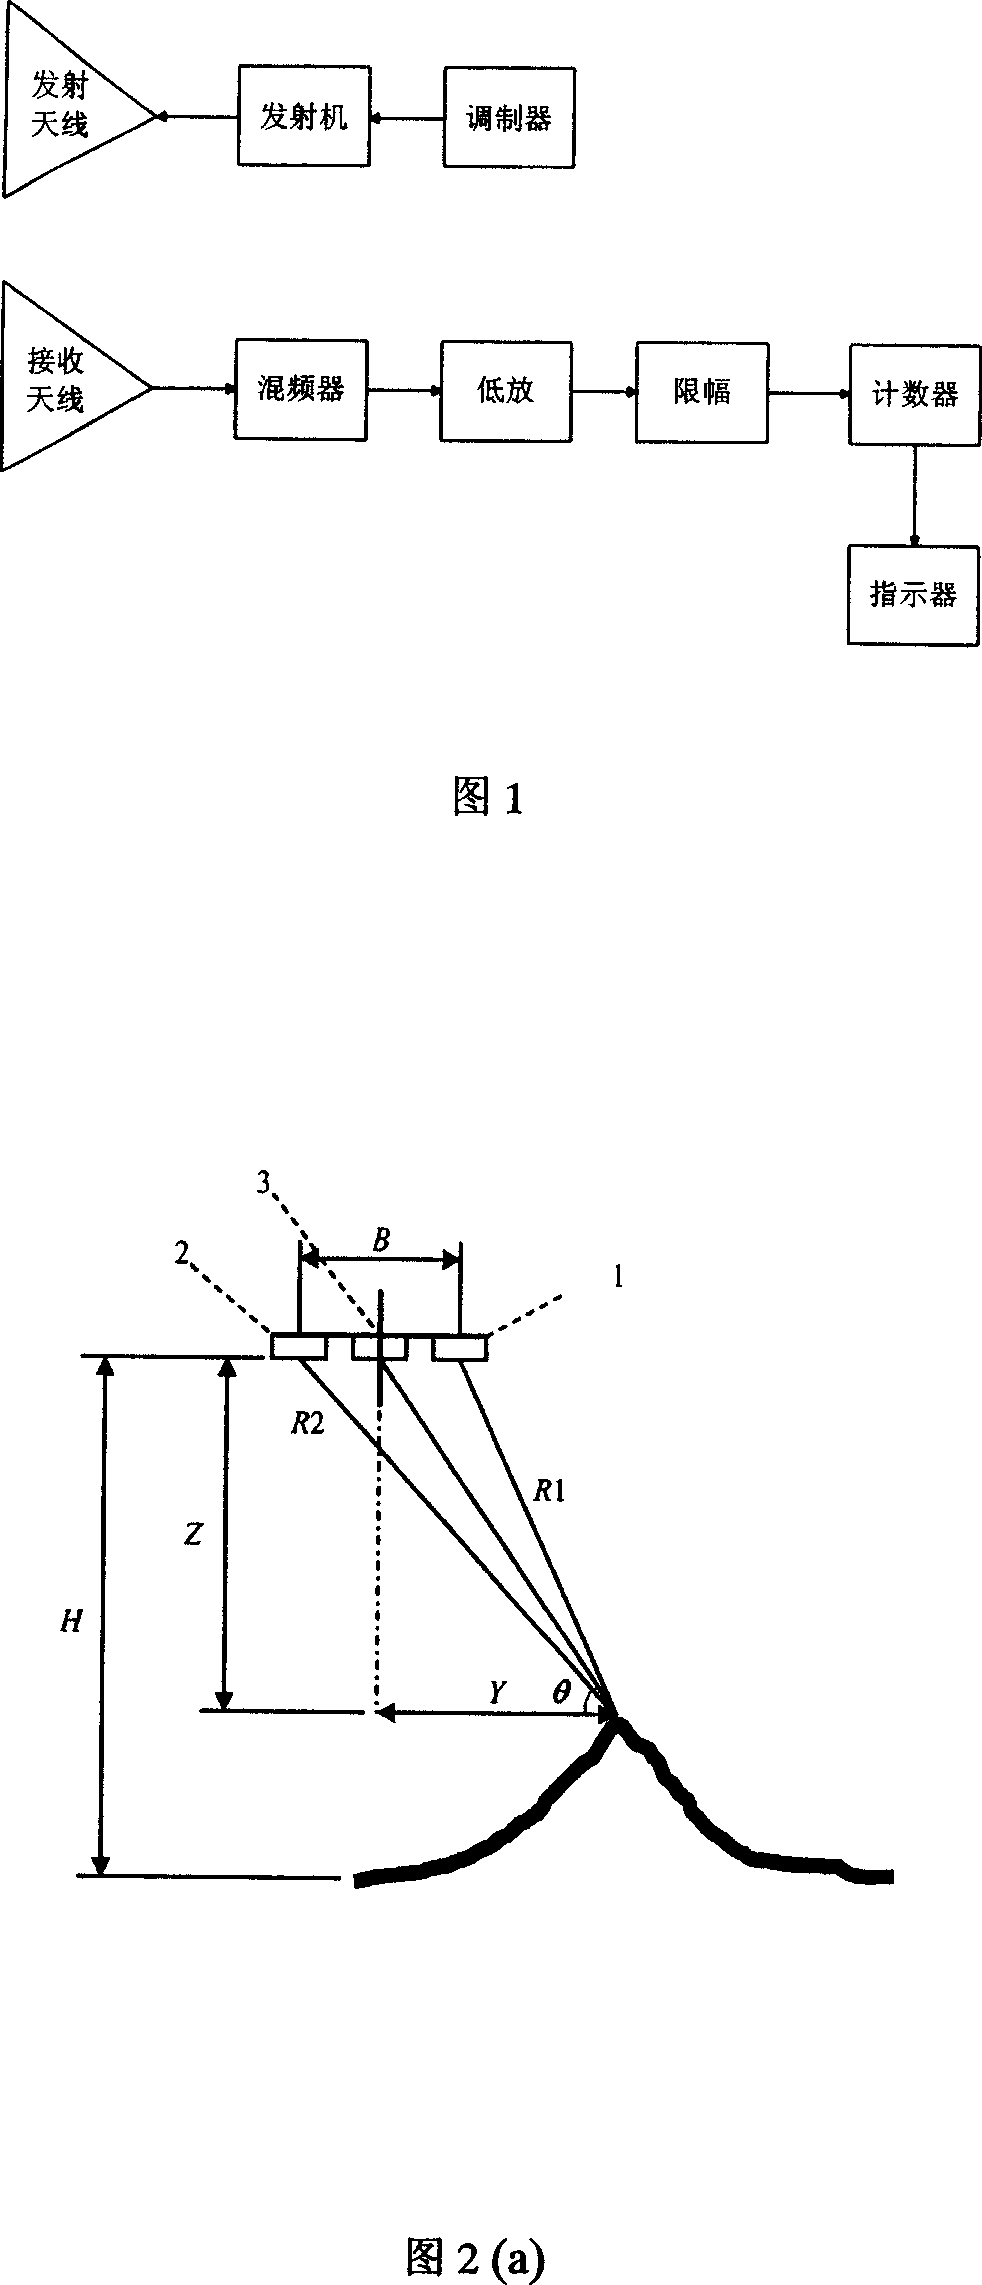 Radar altimeter and measurement method for position of aircraft by the radar altimeter